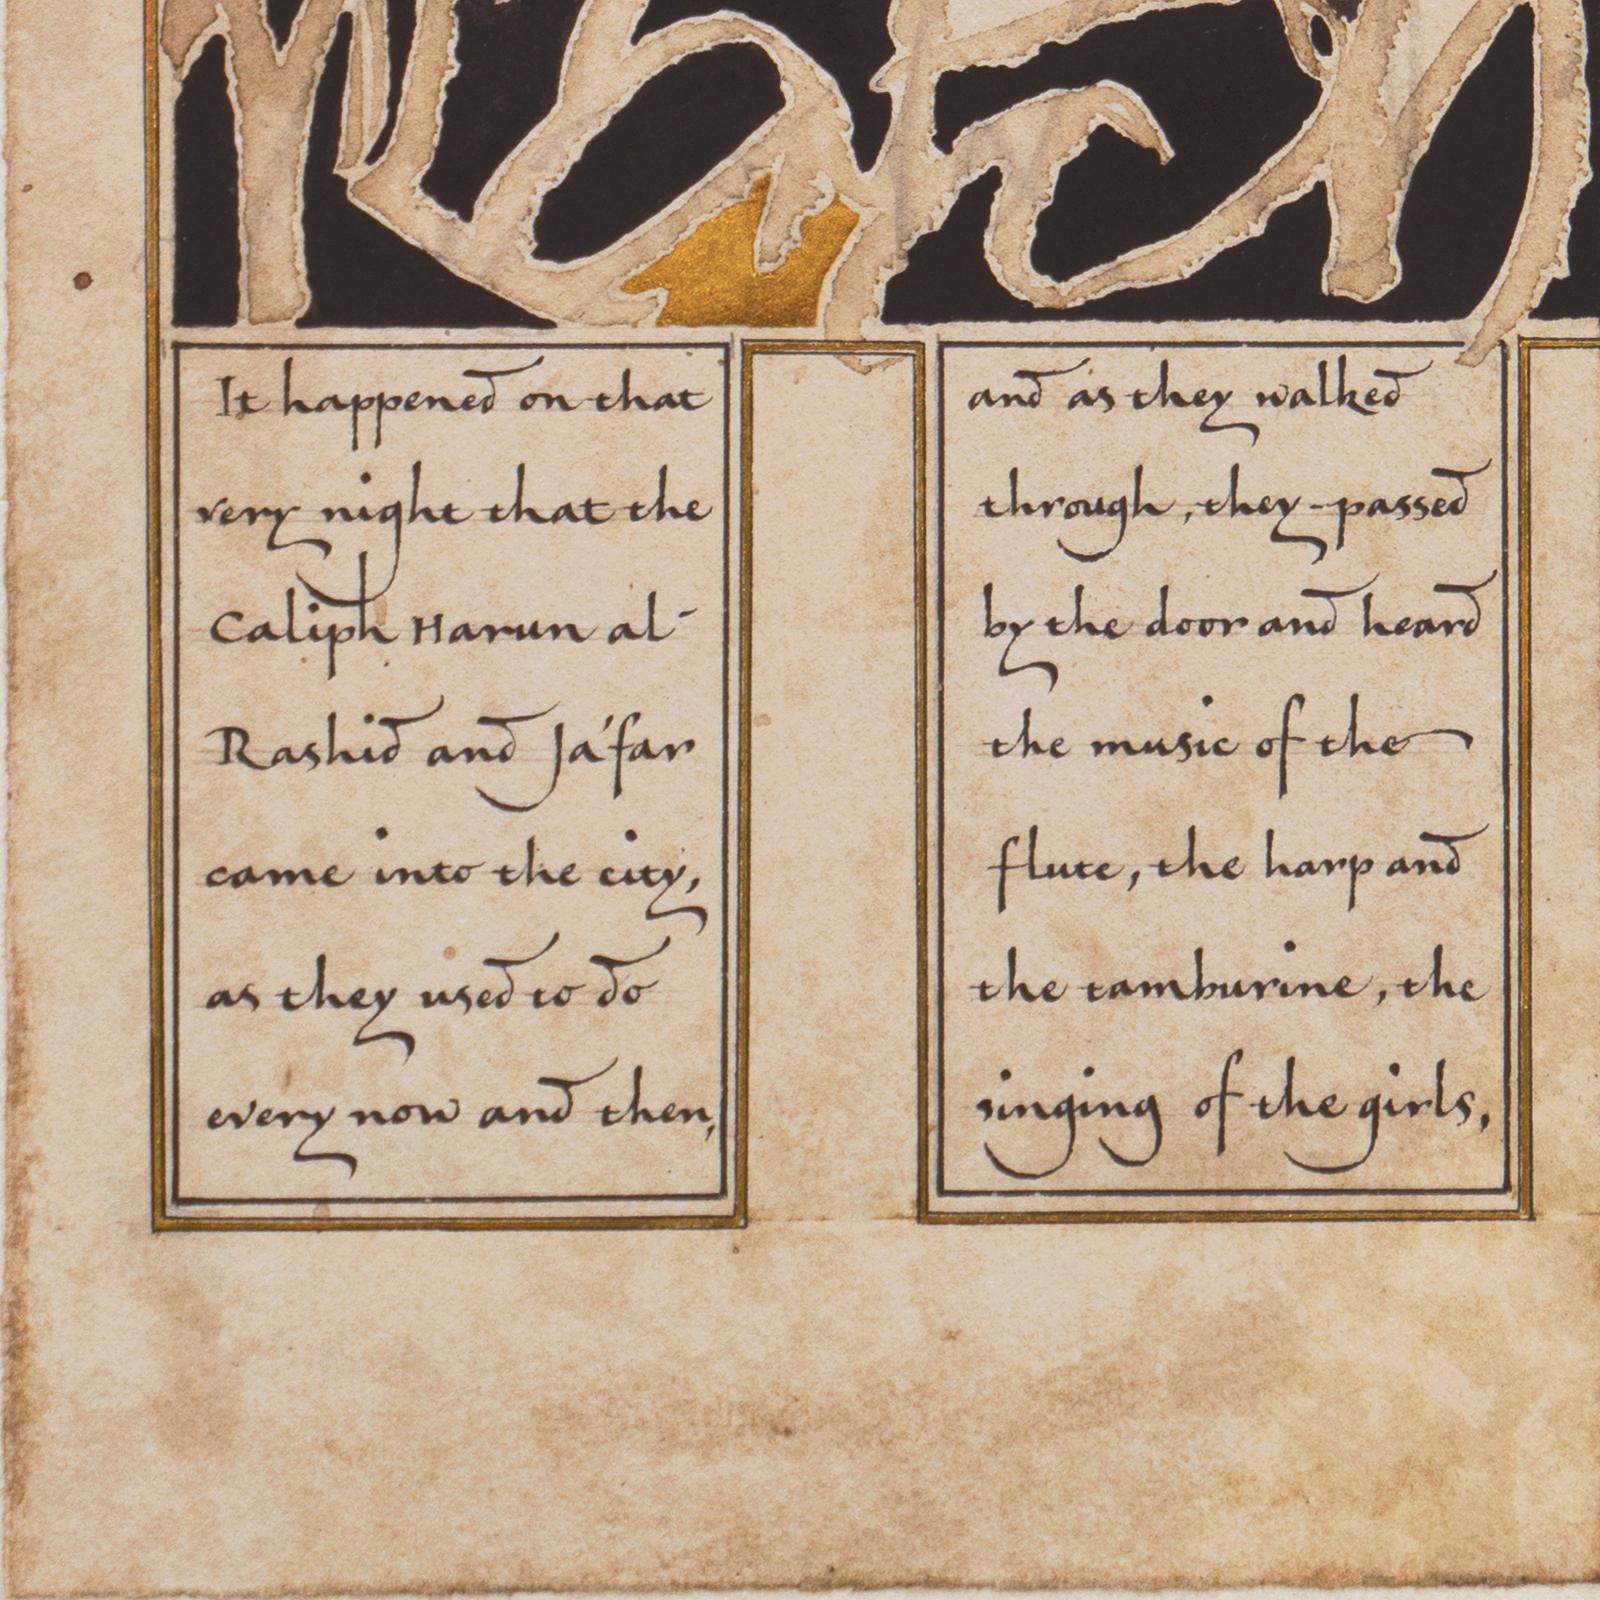 Signed lower right, 'Monica Dengo' (Italian, born 1966) and dated 1995; additionally signed verso and titled, 'No.3: The Caliph Harum al Rashid'.

An educator and calligrapher, Monica Dengo has taught, exhibited and studied around the world. 

Dengo